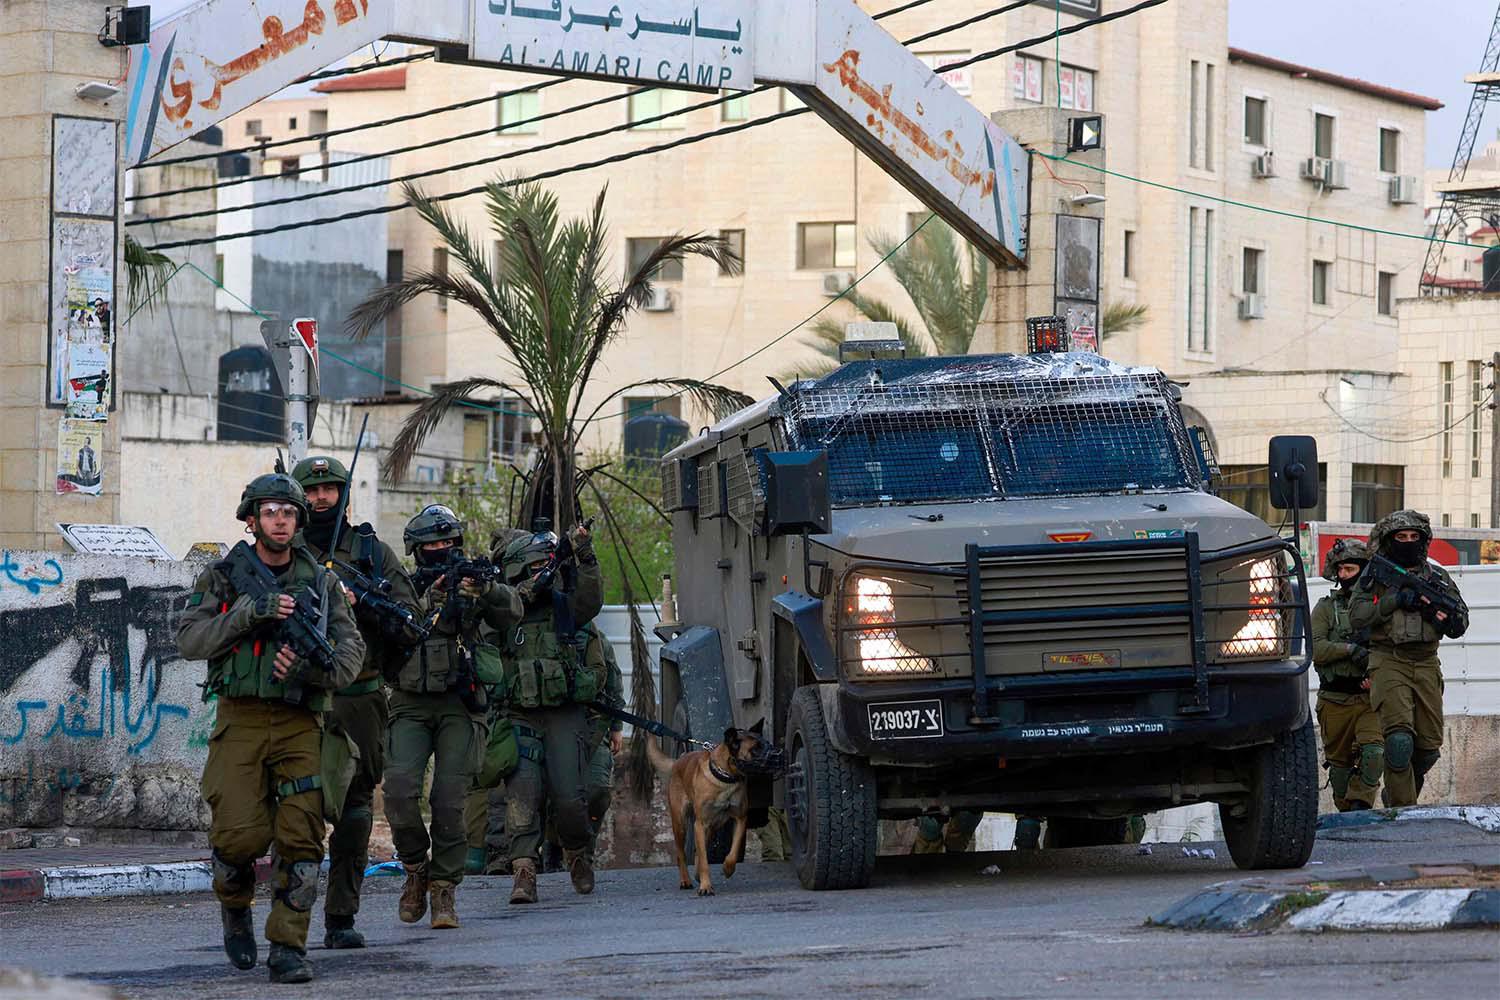 Israeli forces detained at least 55 Palestinians in raids across the West Bank overnight